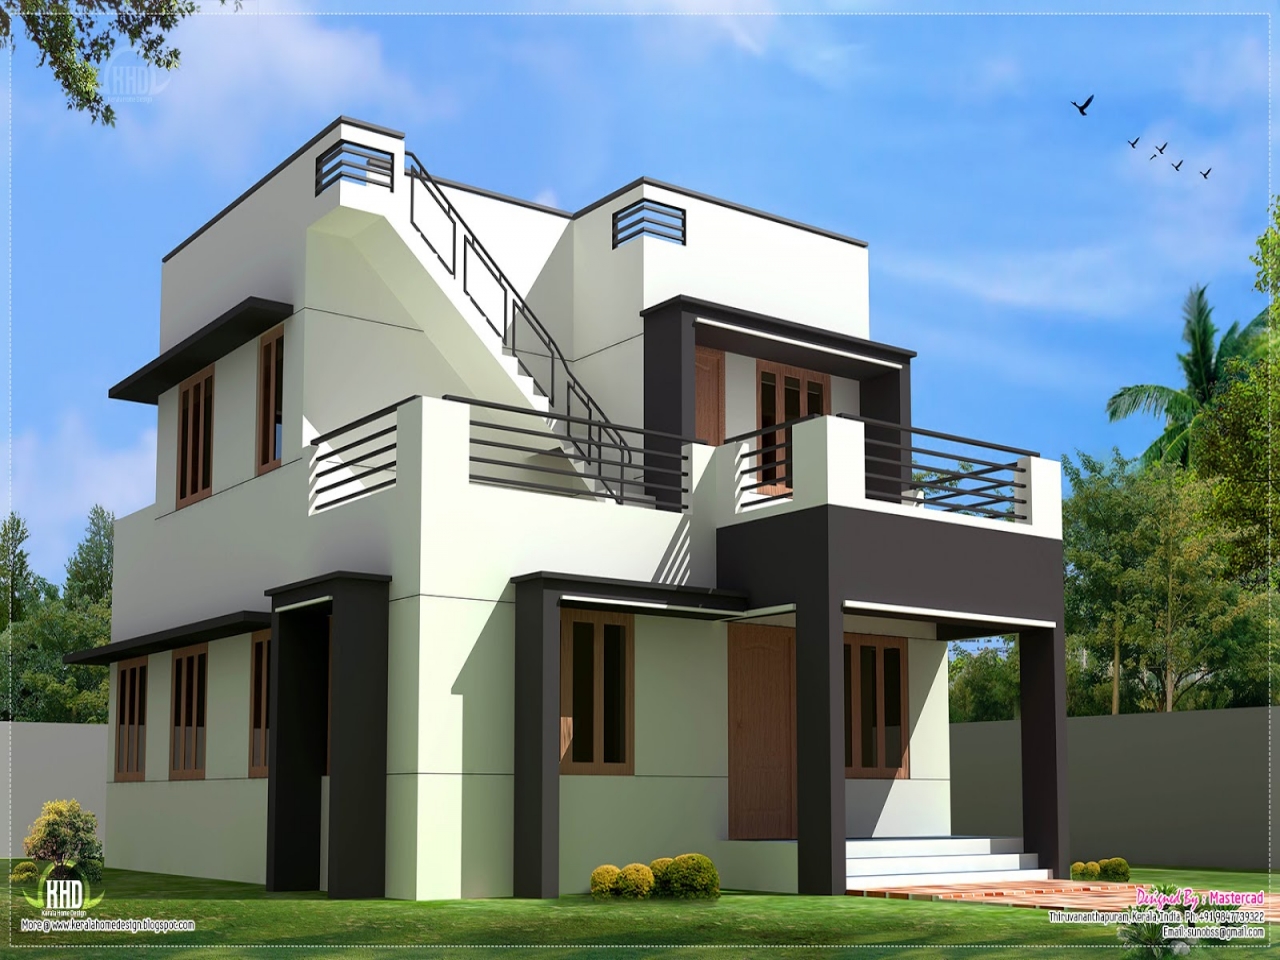 Collection 50 Beautiful Narrow House Design For A 2 Story 2 Floor